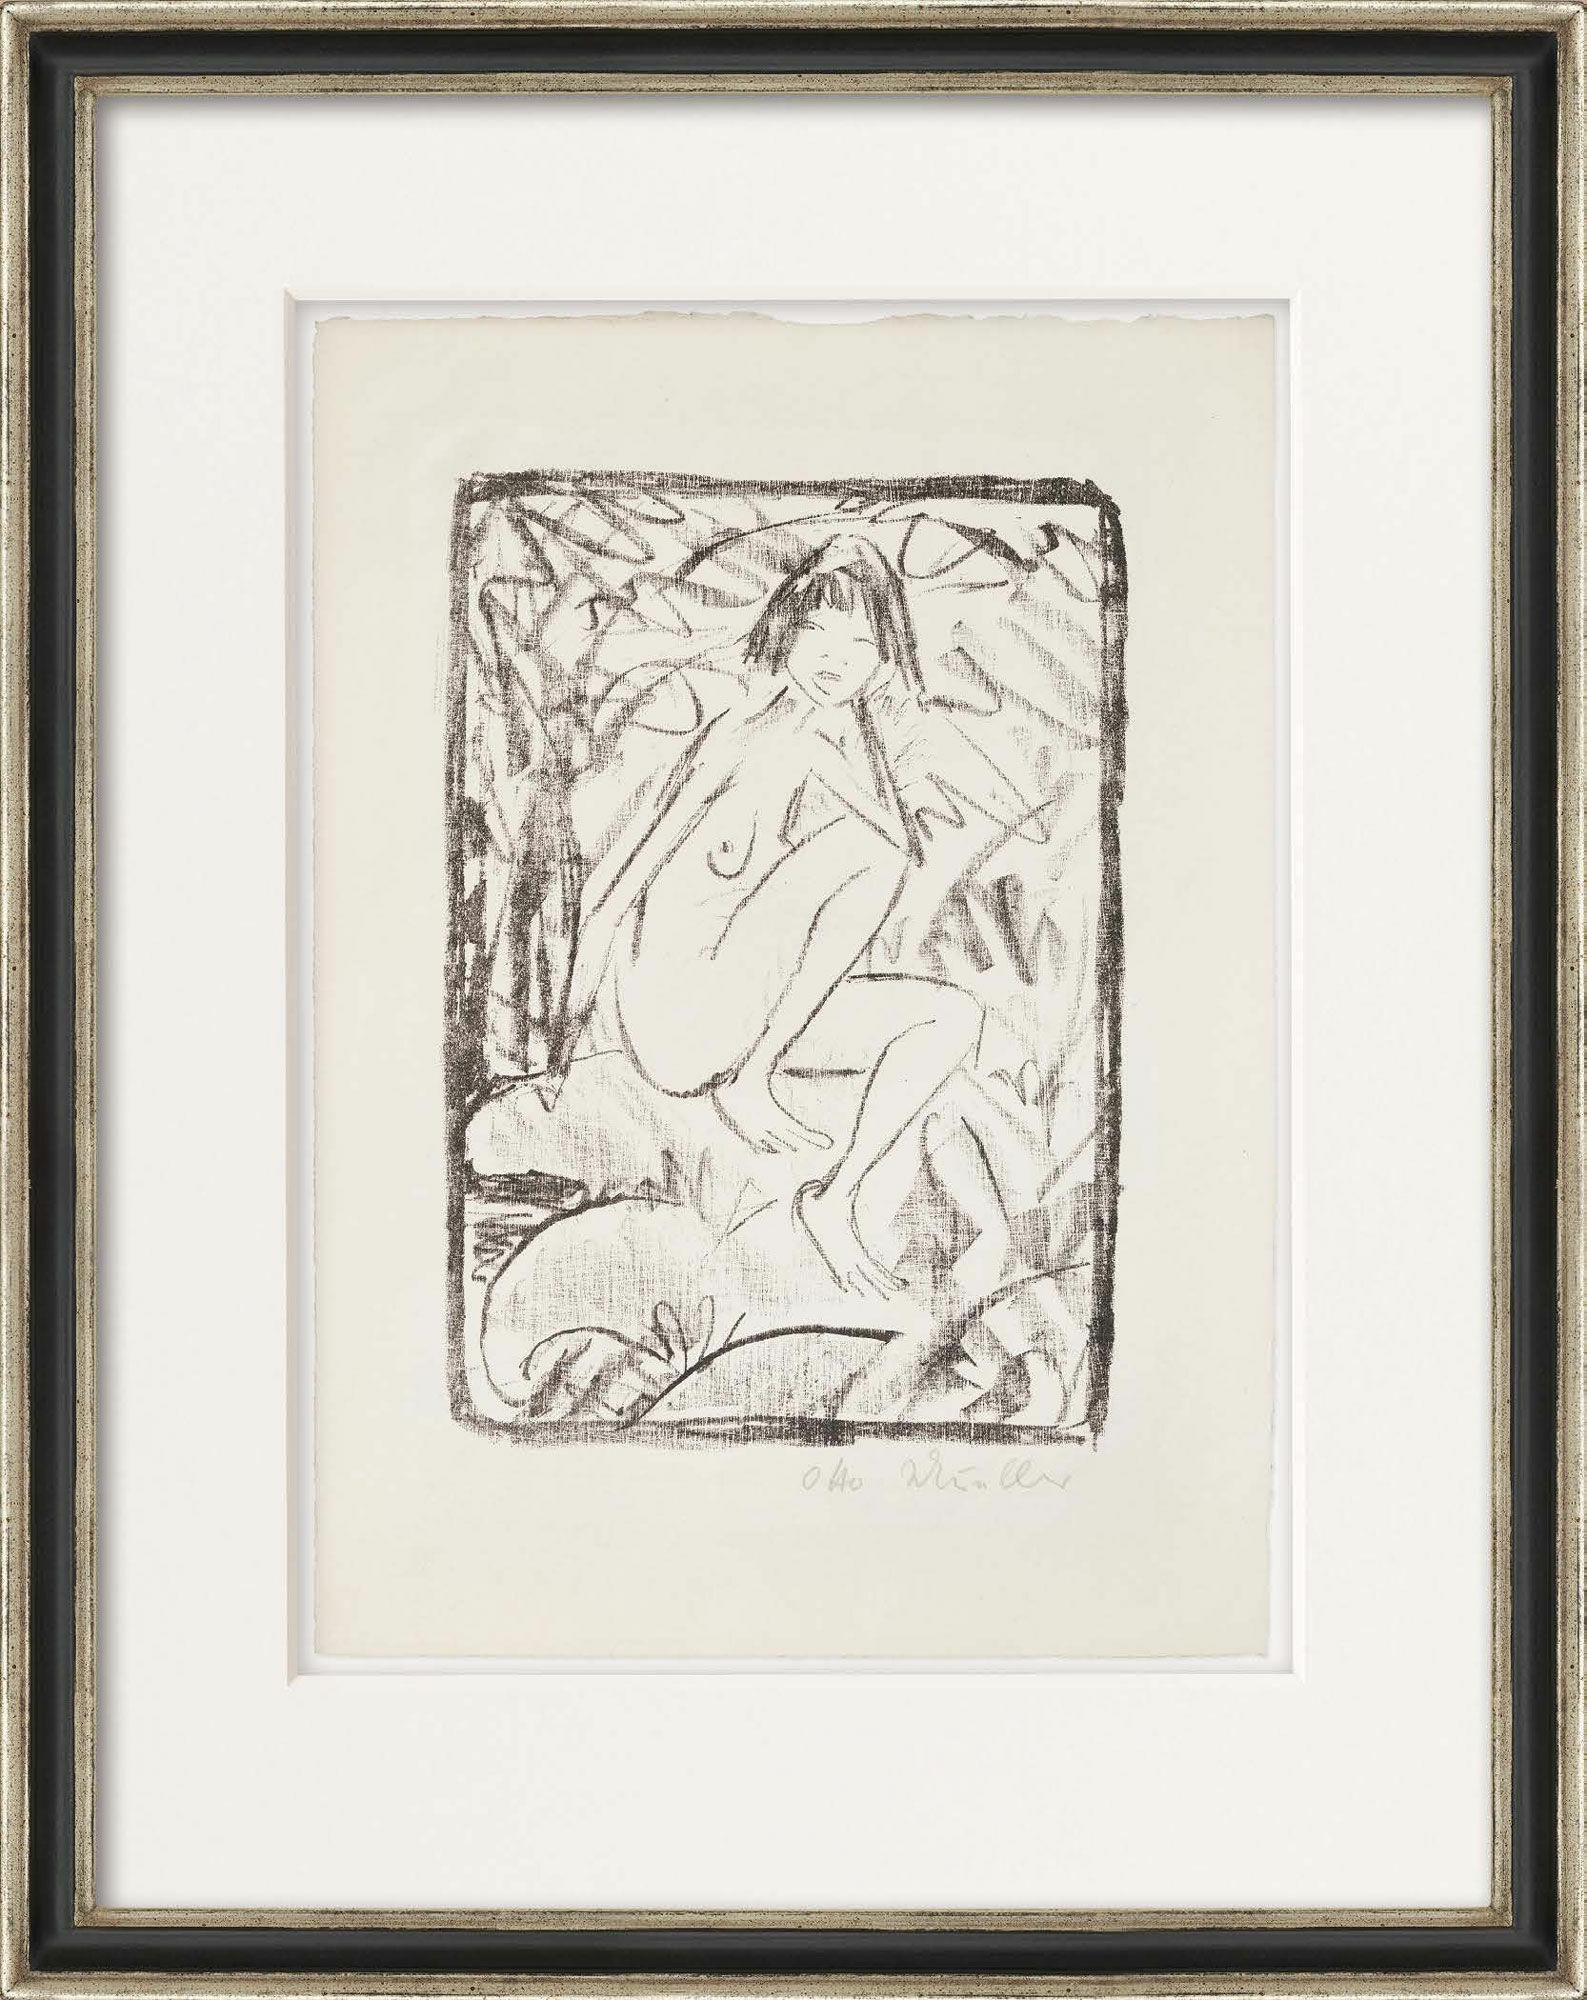 Picture "Seated Woman Surrounded by Foliage" (1923) by Otto Mueller